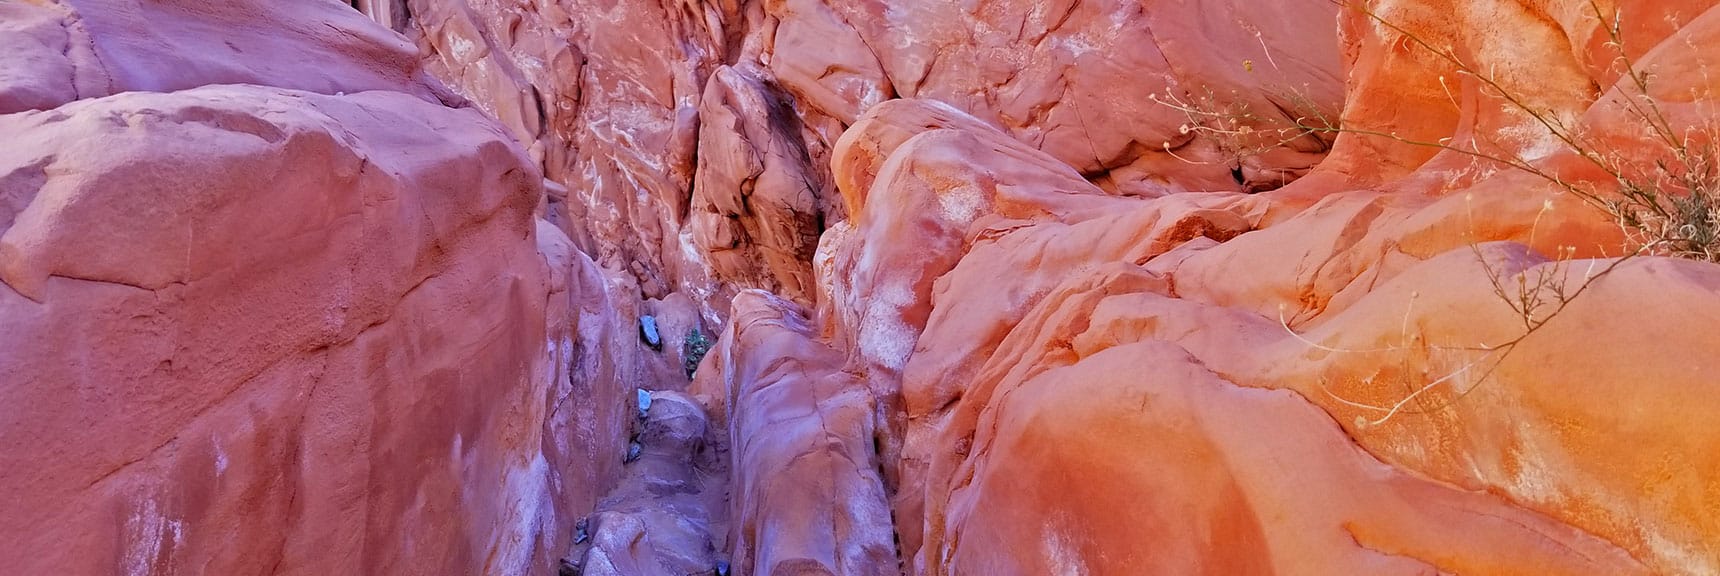 Navigating the Red Rock Canyon on Charlie's Spring Trail, Valley of Fire State Park, Nevada